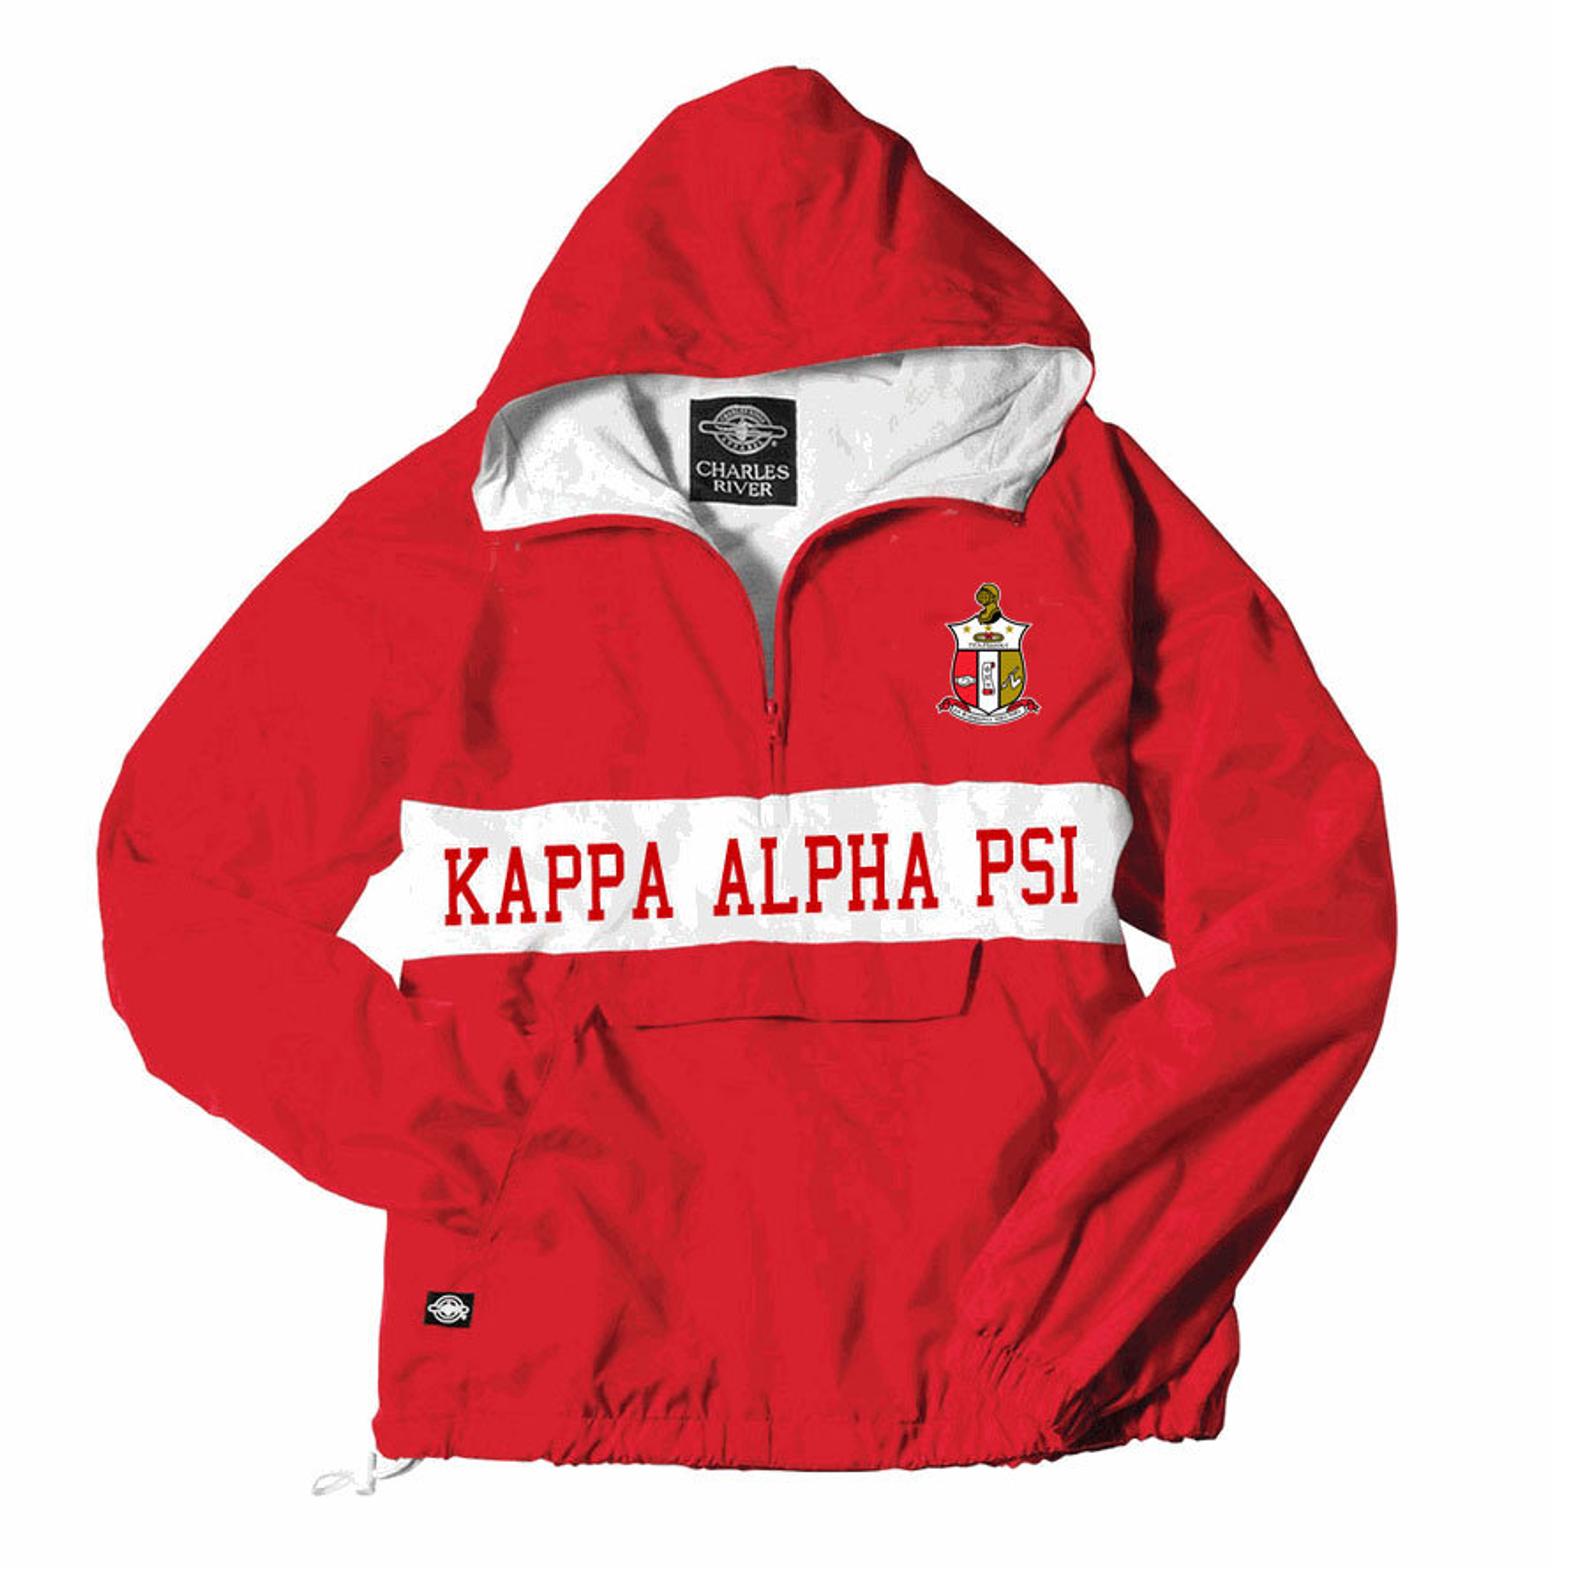 The Ultimate Kappa Alpha Psi Fraternity, Inc. Homecoming Shopping Guide